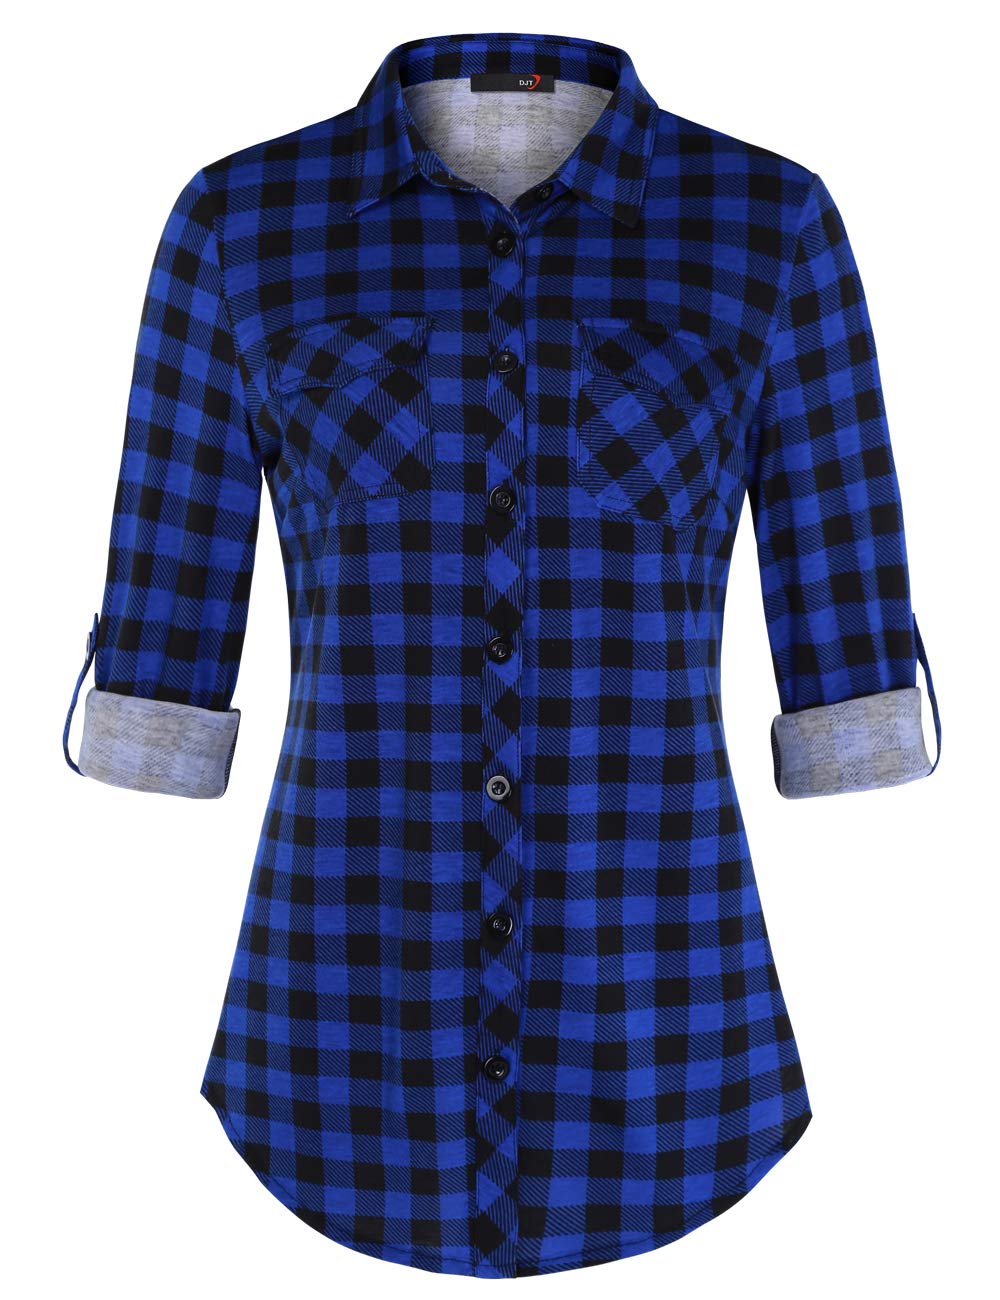 DJT Roll Up Long Sleeve Vibrant Blue Women’s Collared Button Down Plaid Shirt